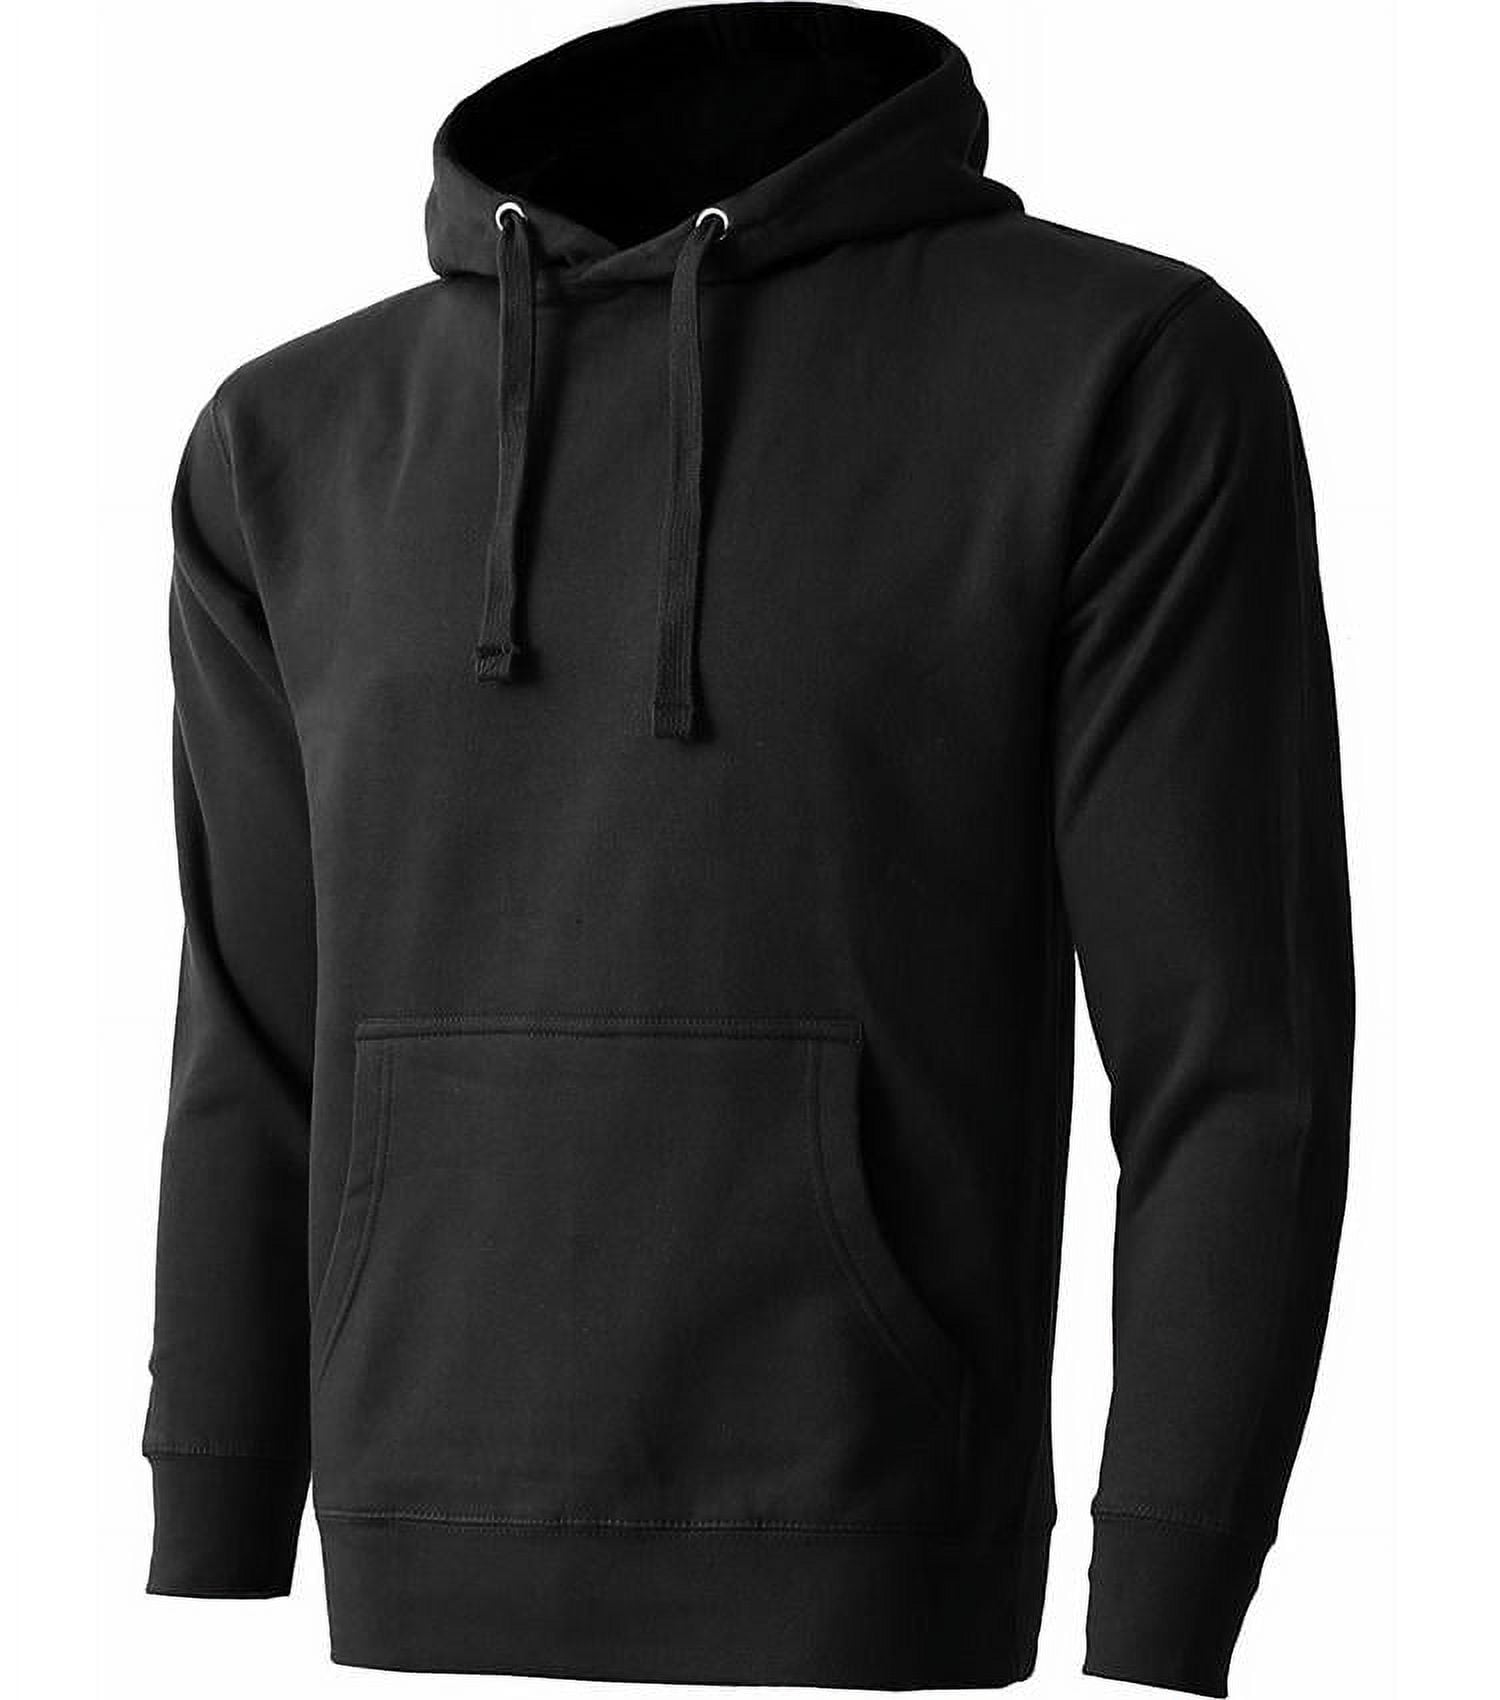 Men's Heavyweight Casual Pullover Hoodie Sweatshirt with Front Pocket  (Black, 4XL) 